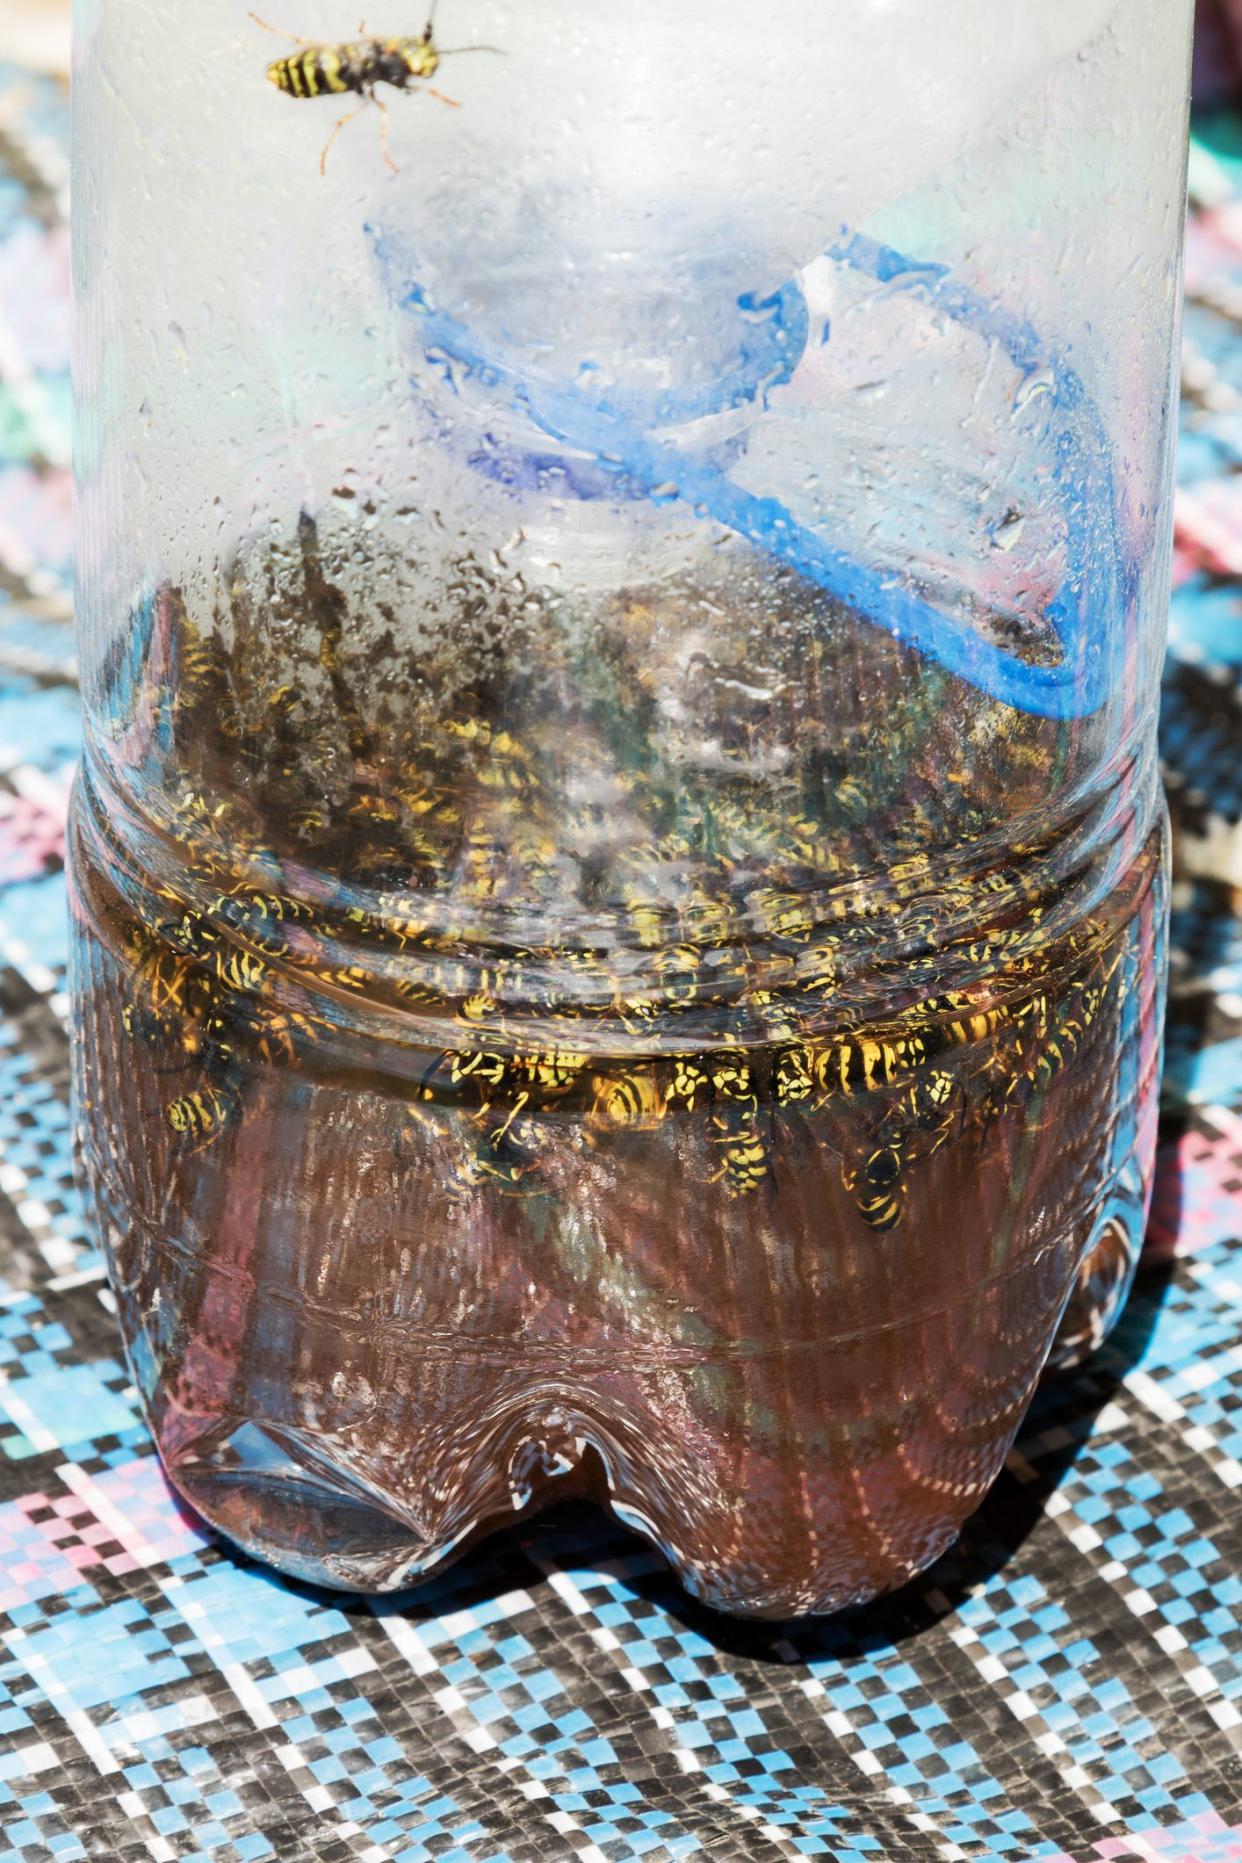 Handmade trap for wasps made of a plastic bottle with syrup inside full of wasps